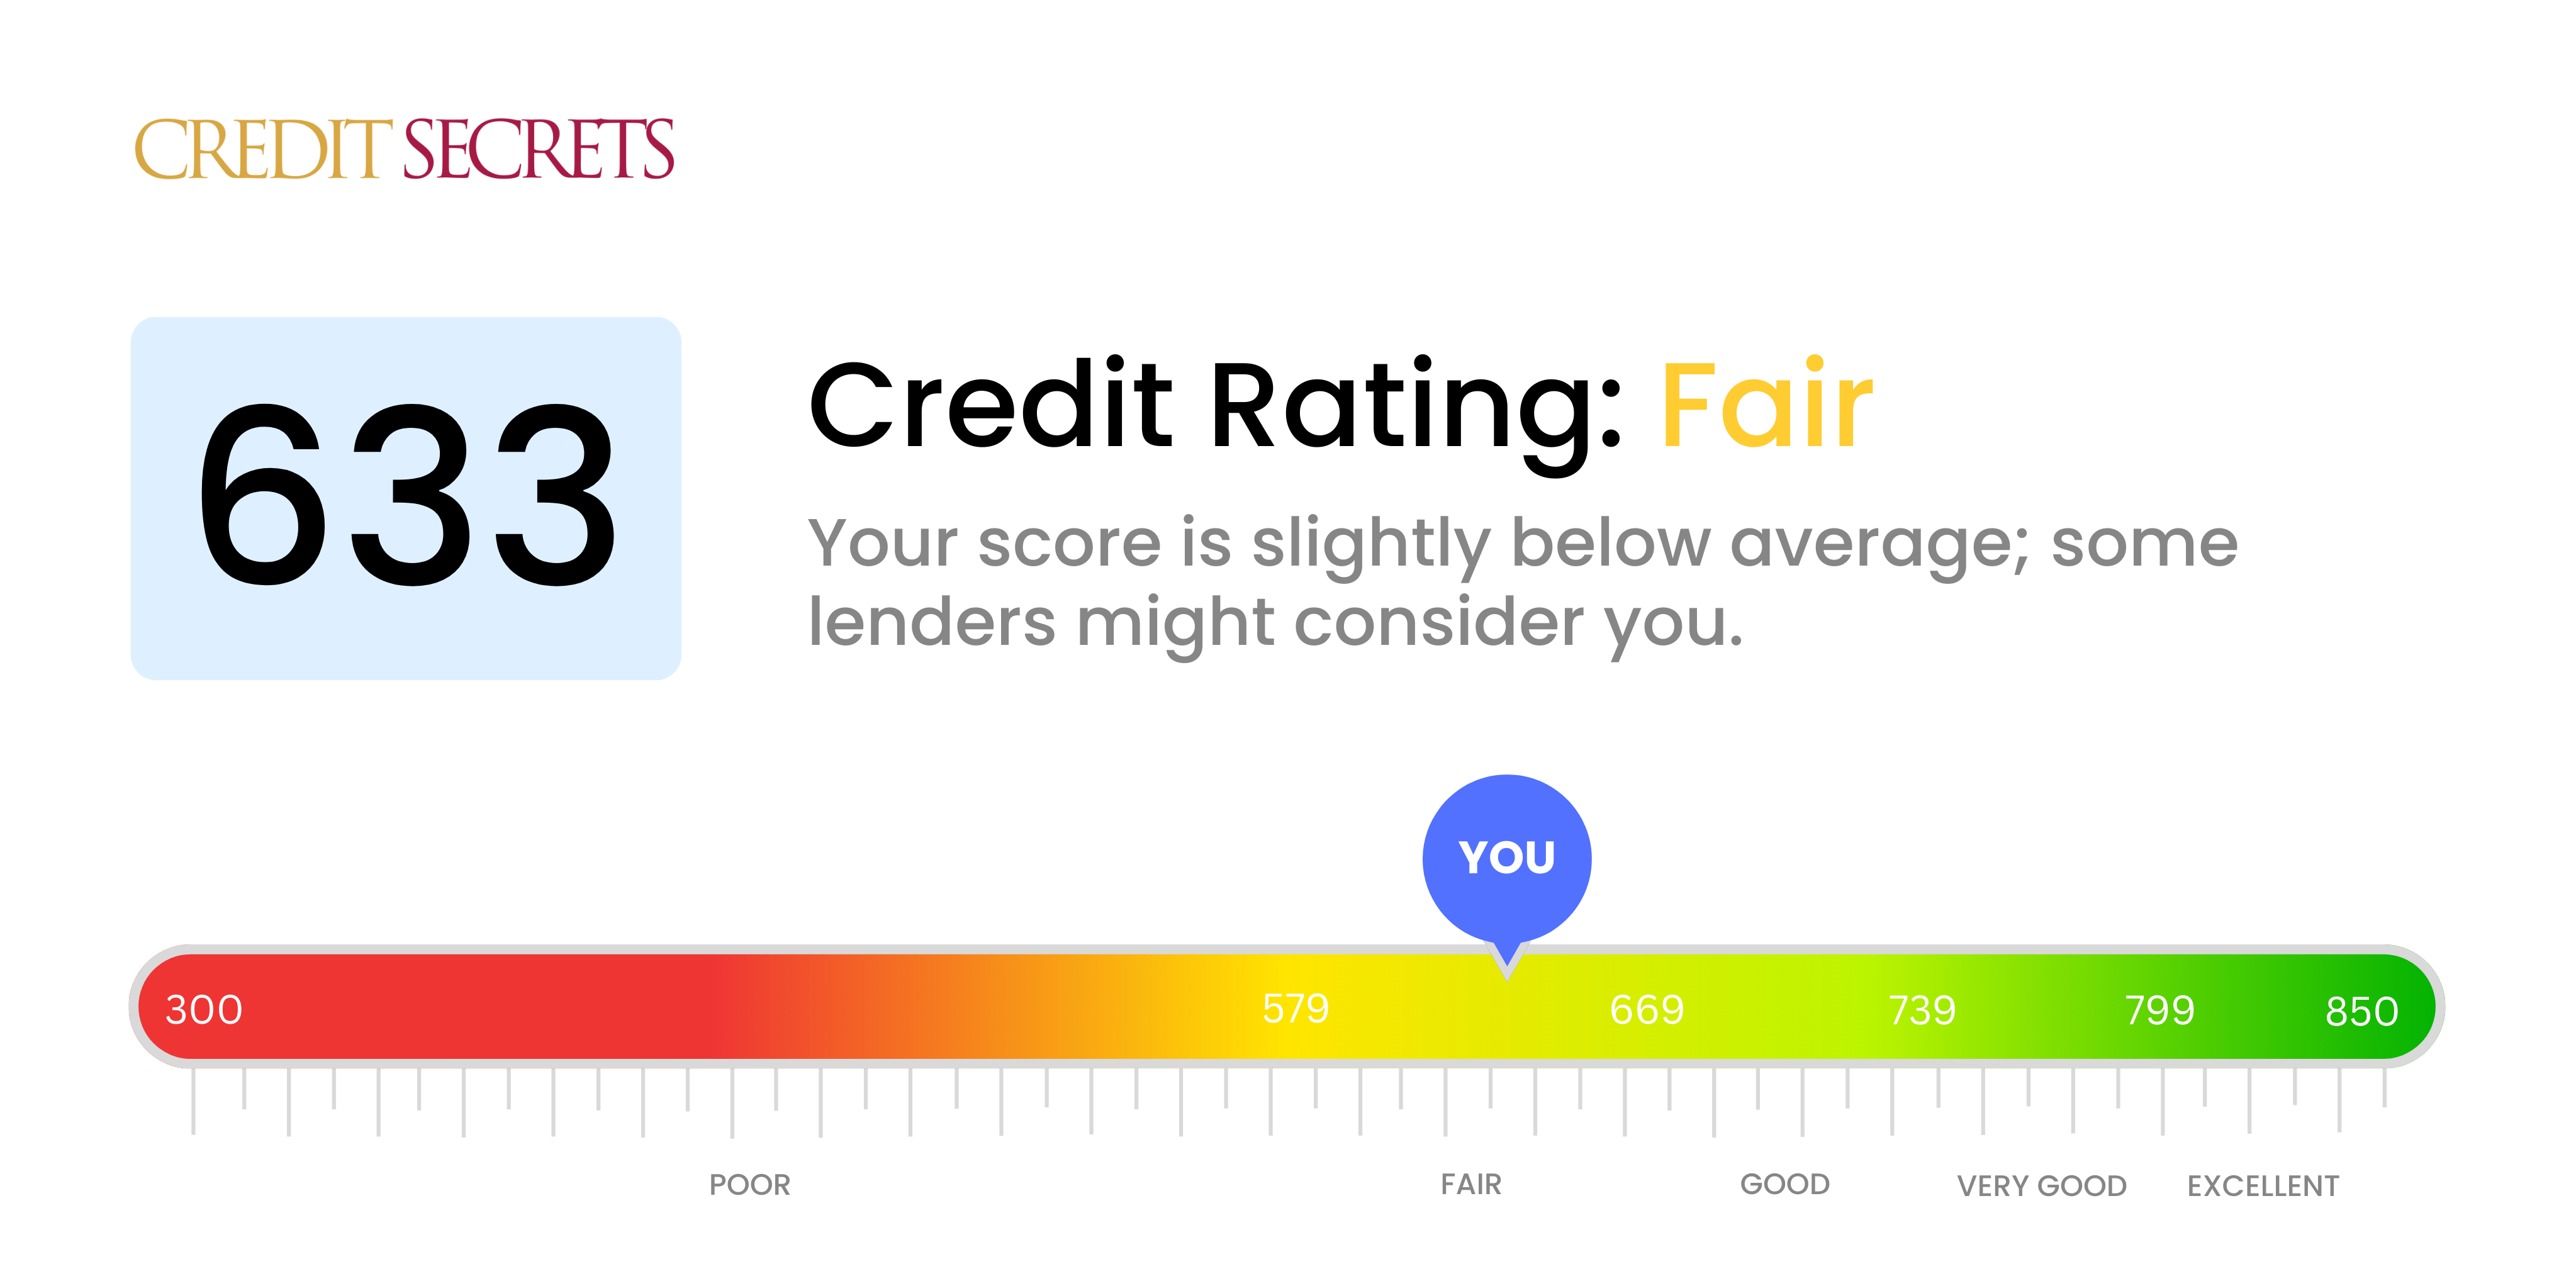 Is 633 a good credit score?